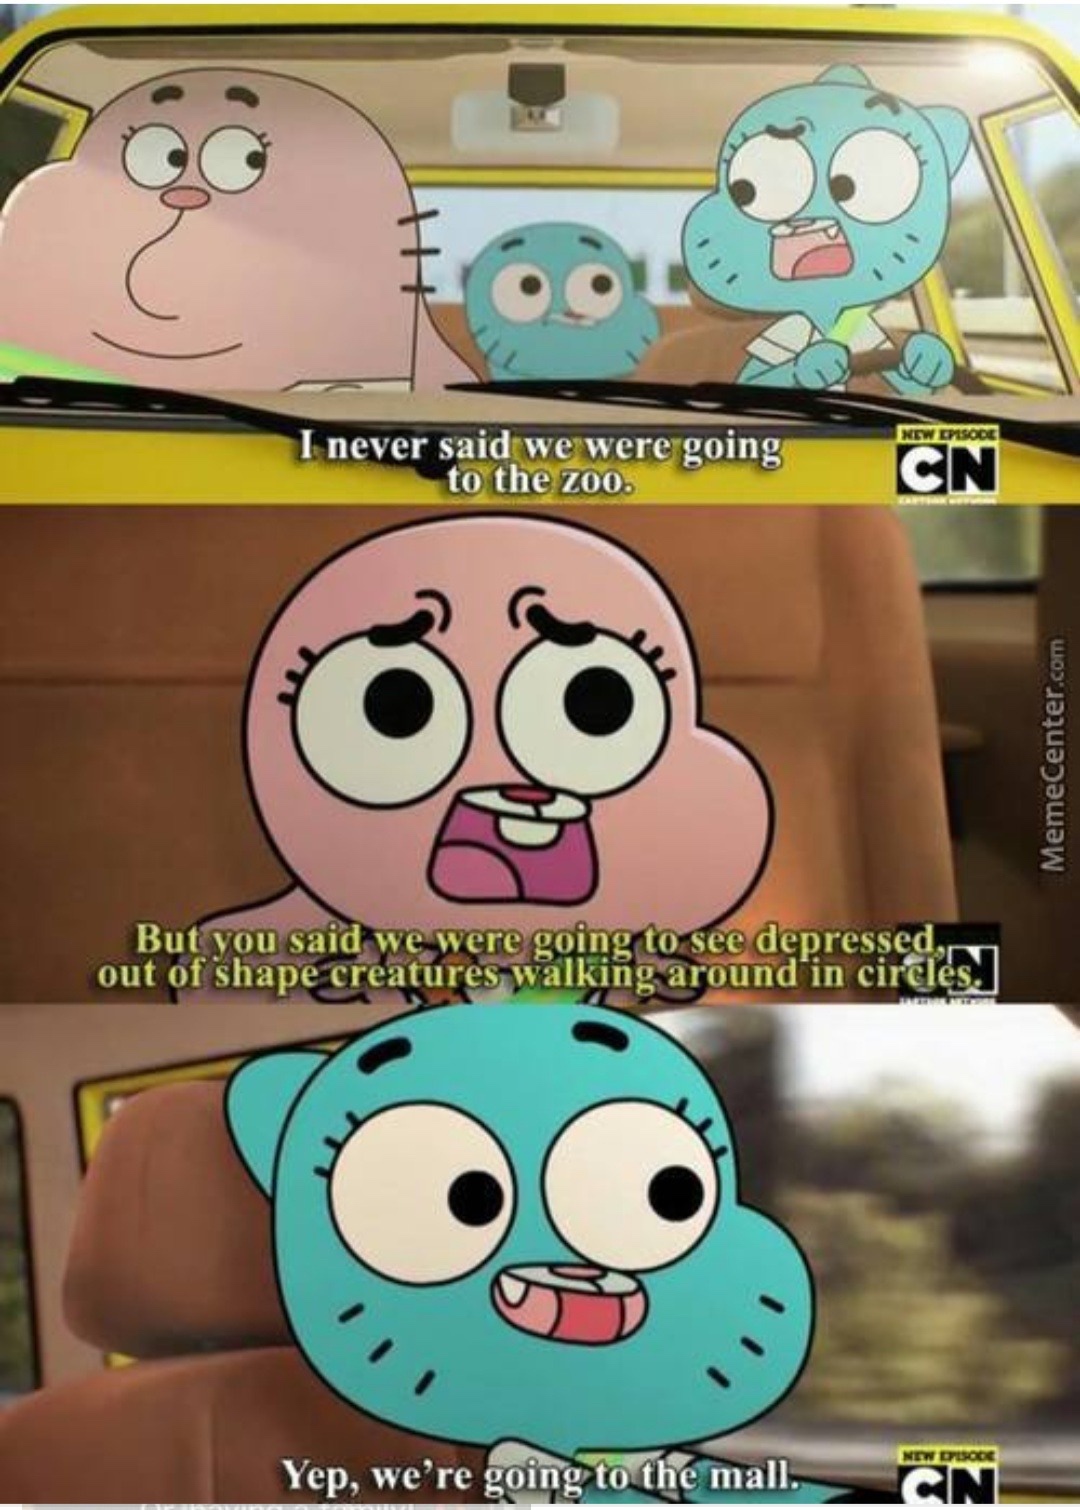 funny gumball memes - Xew Episode I never said we were going Cn to the zoo. MemeCenter.com But you said we were going to see depressed, out of shape creatures walking around in circles. Yep, we're going to the mall. New Dpisode Cn